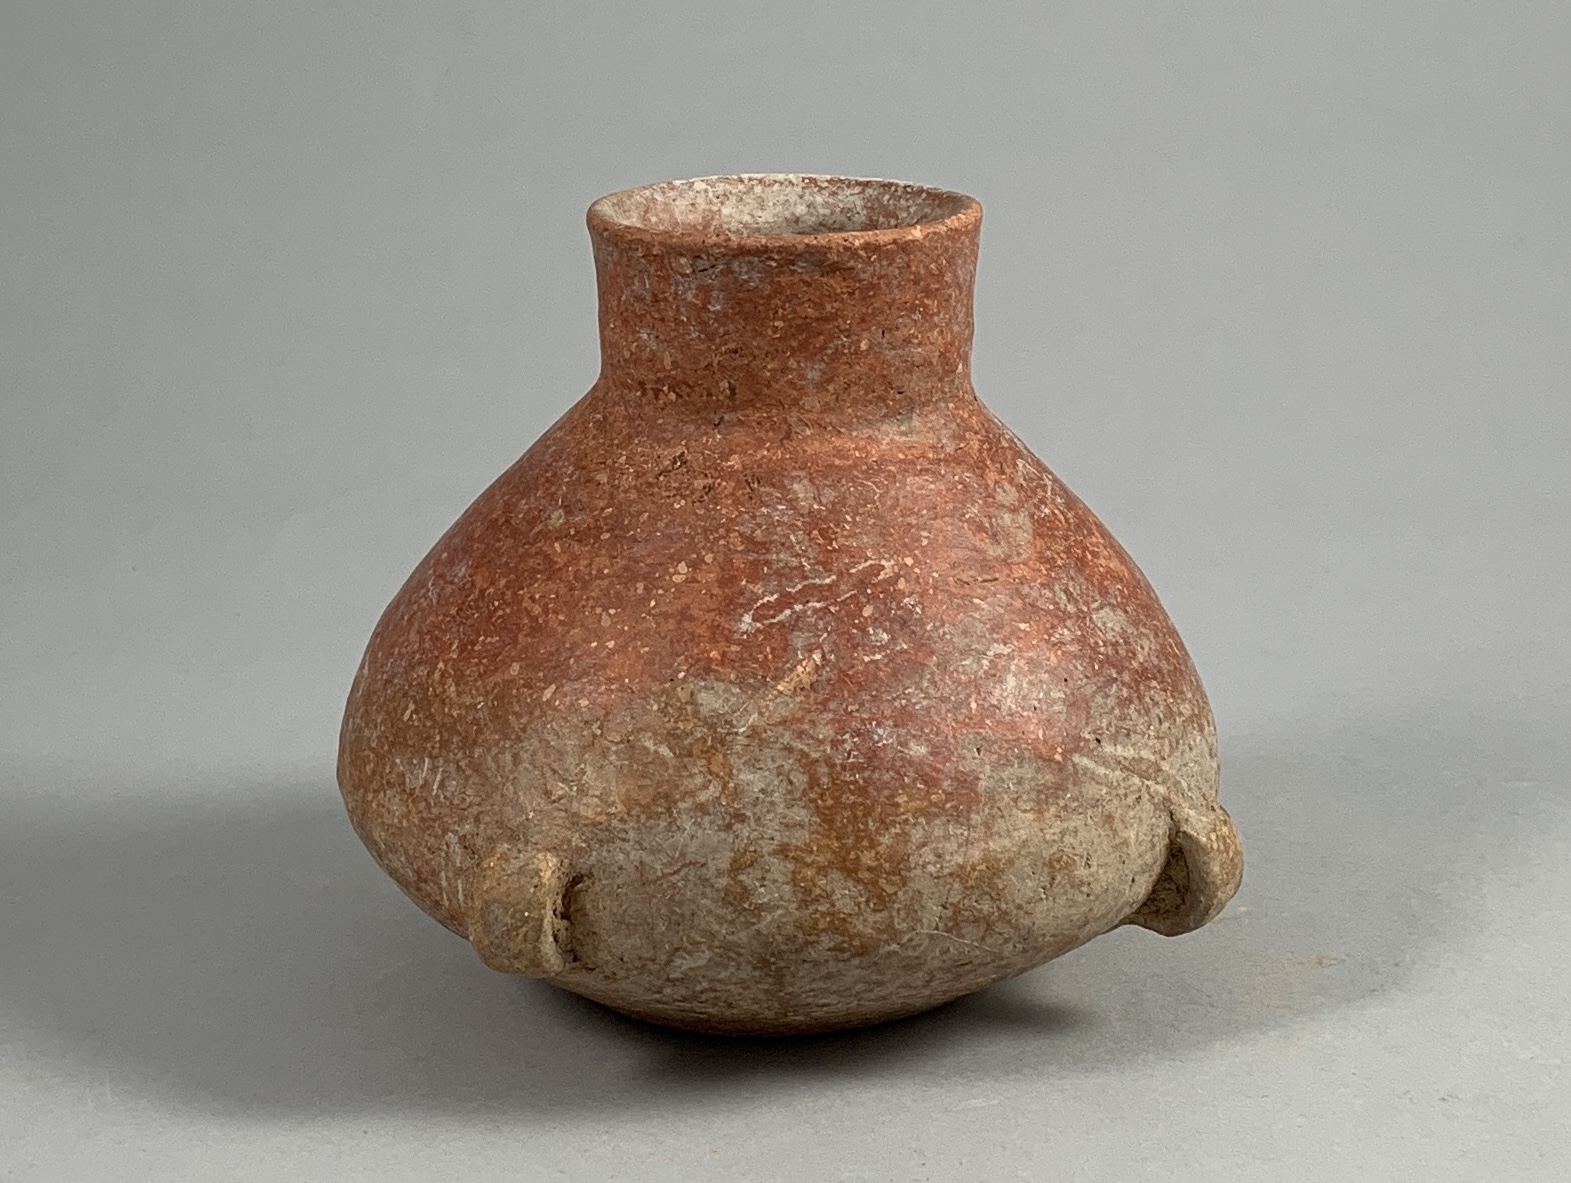 A Red Pottery Vase With Small Handles, Hongshan Culture (4500-3000 Bc) - Image 2 of 5